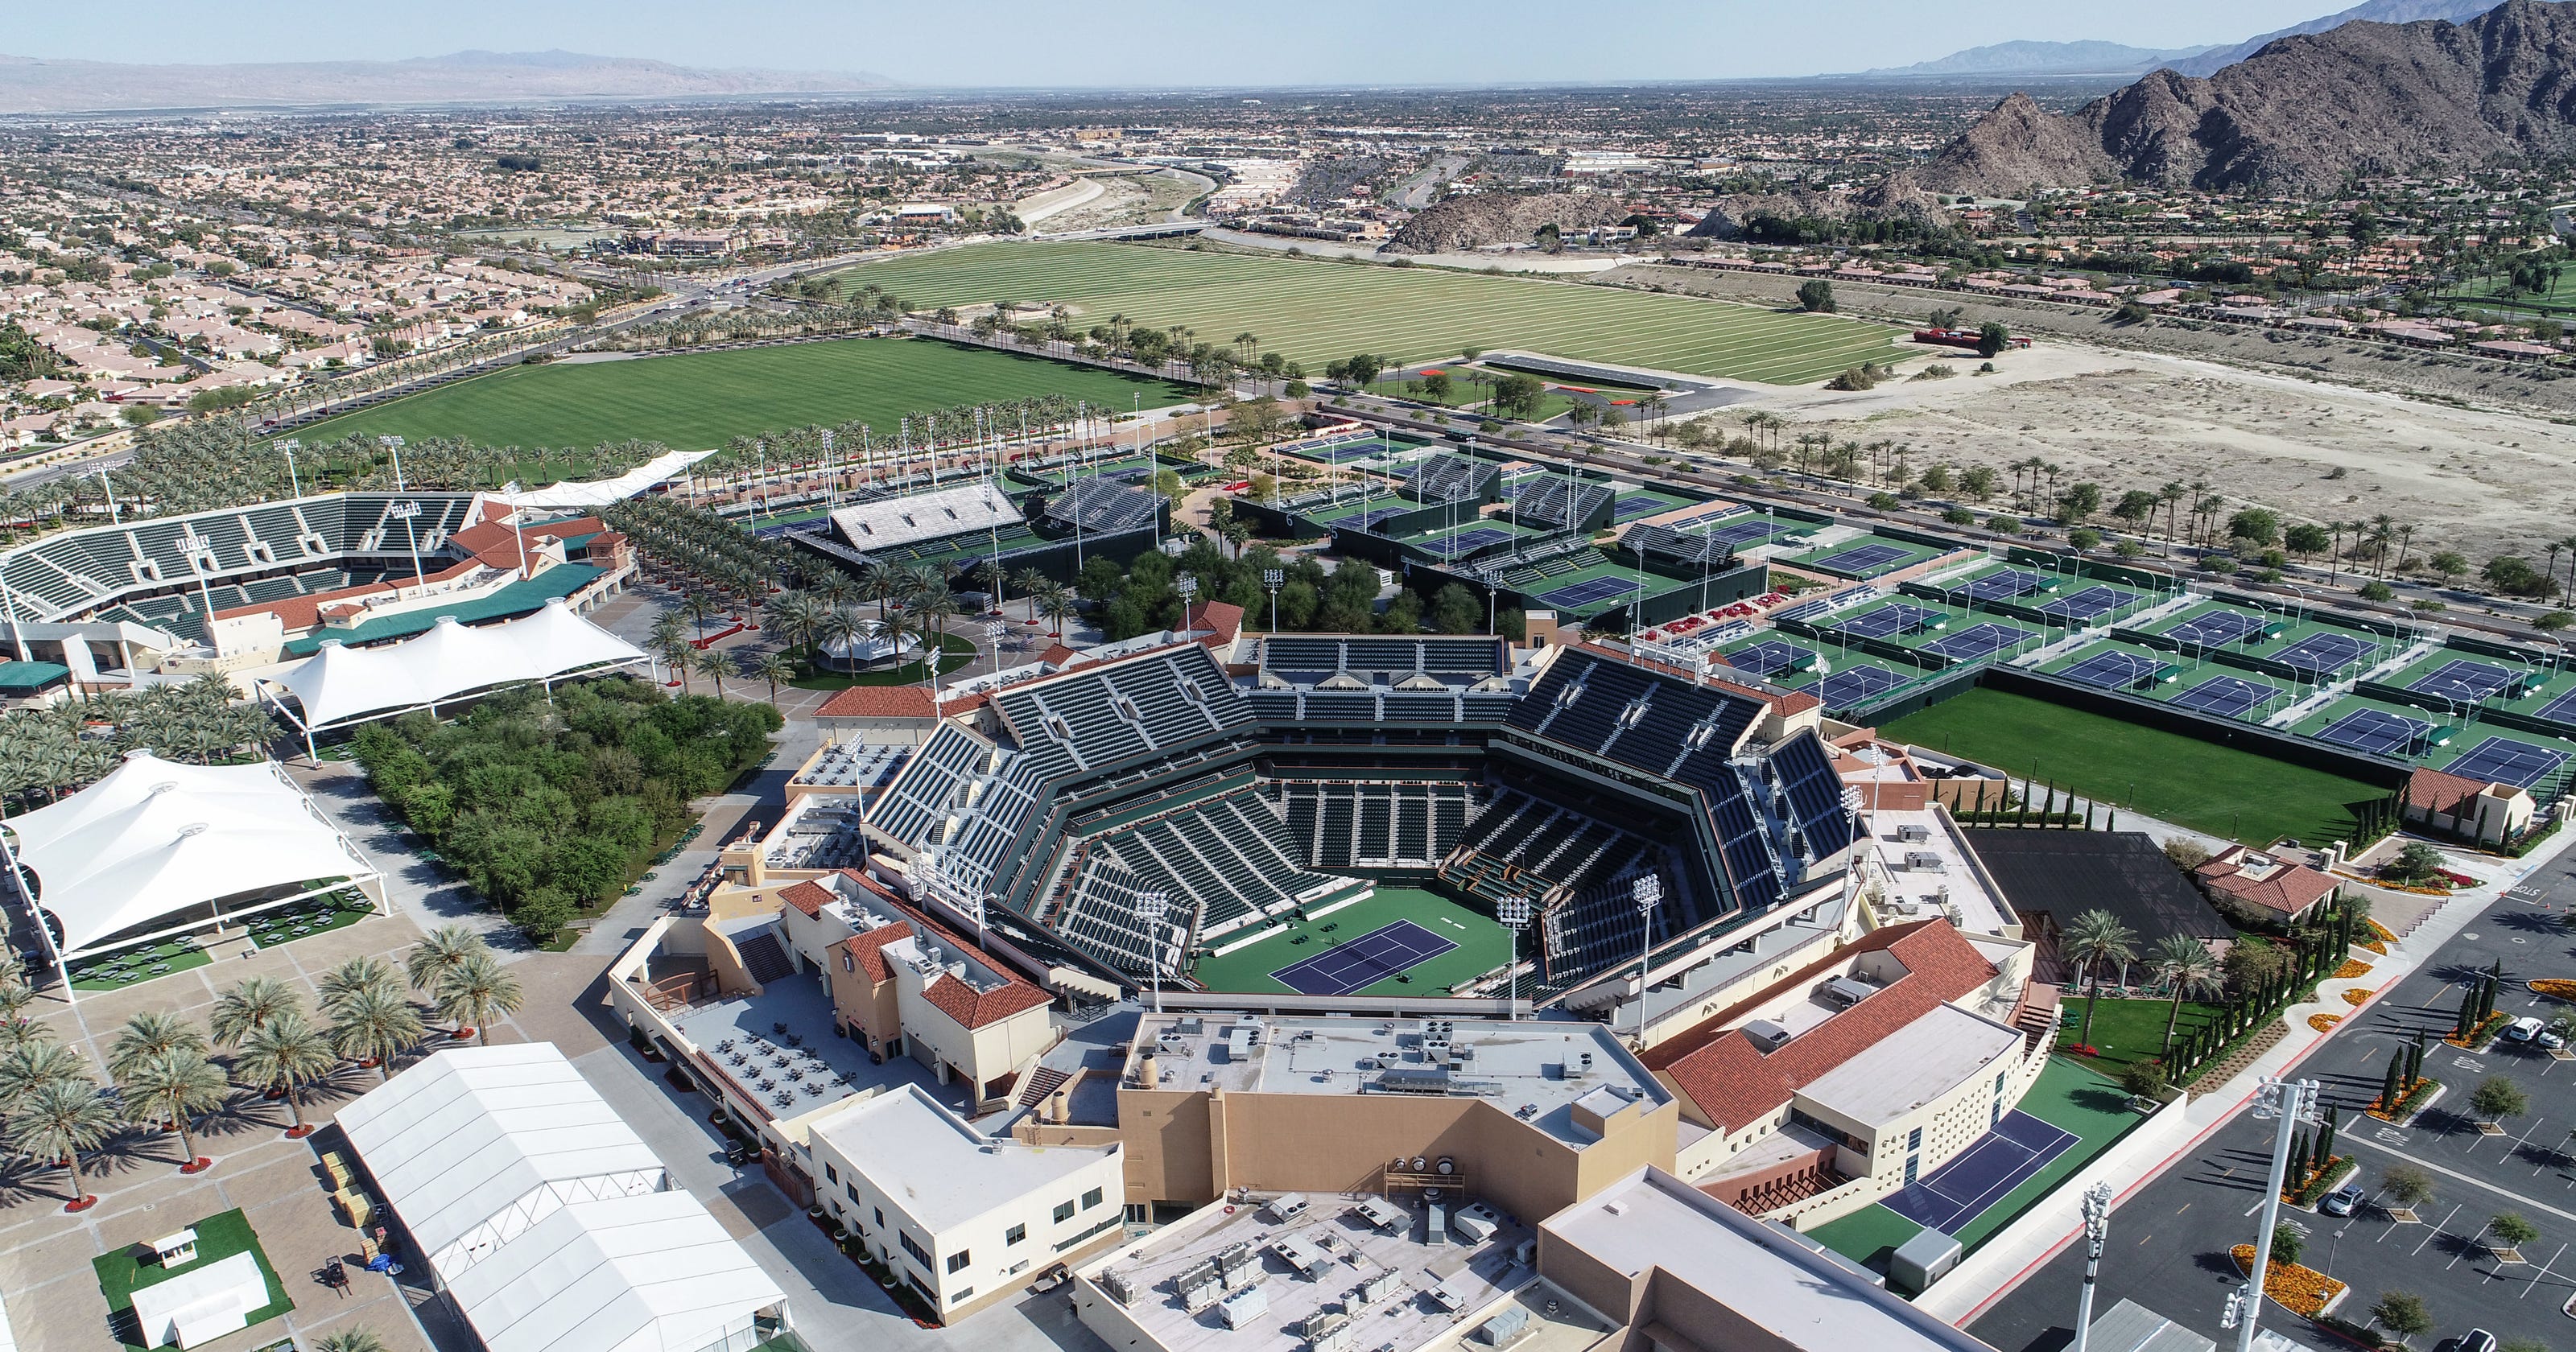 How would U.S. Open at Indian Wells differ from the BNP Paribas Open?